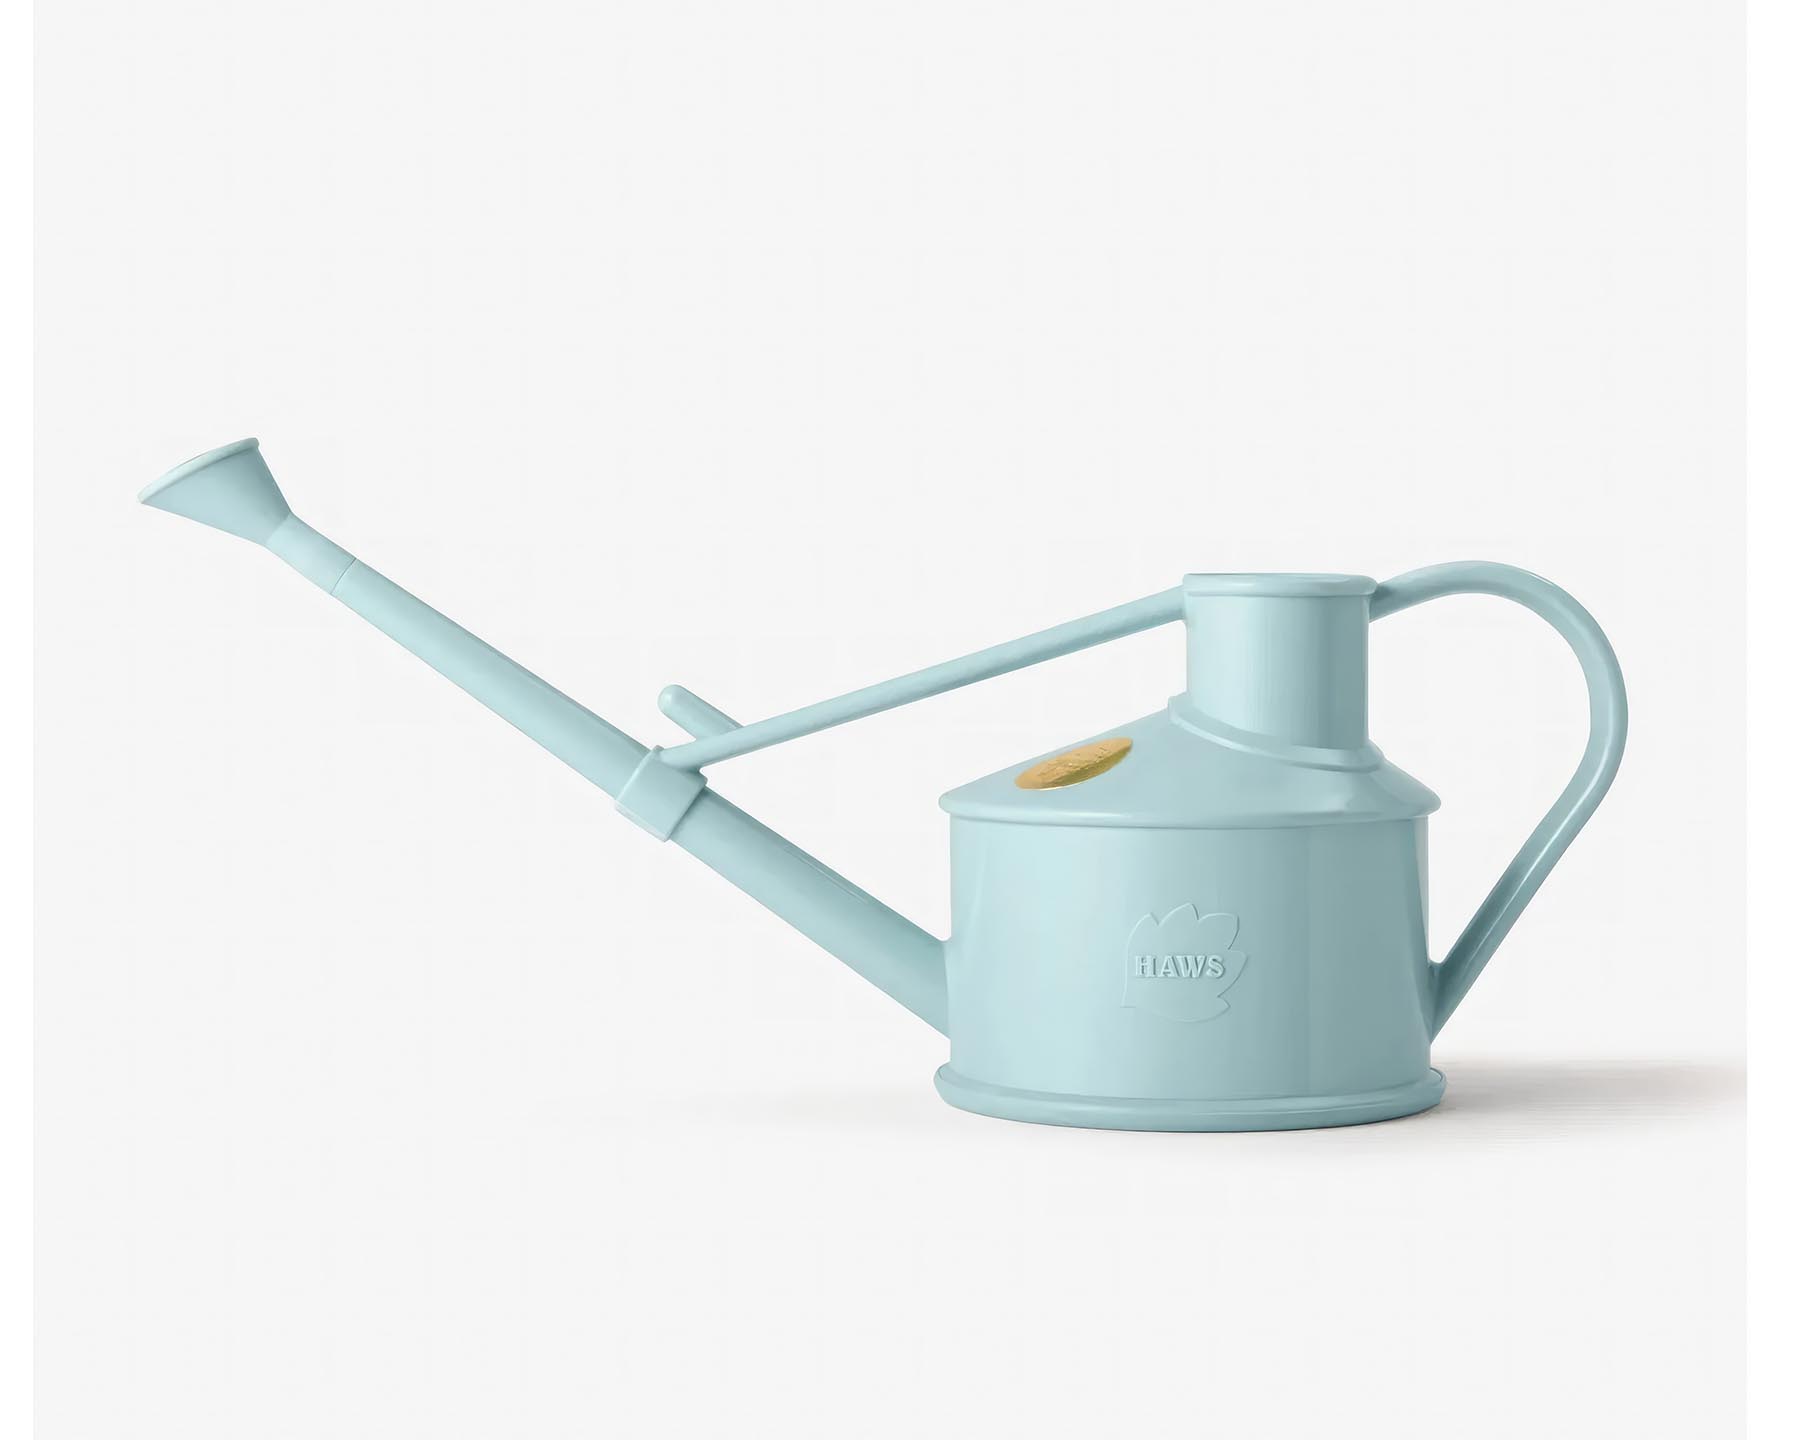 The Langley Sprinkler Watering Can - 500ml by Haws - Duck Egg Blue